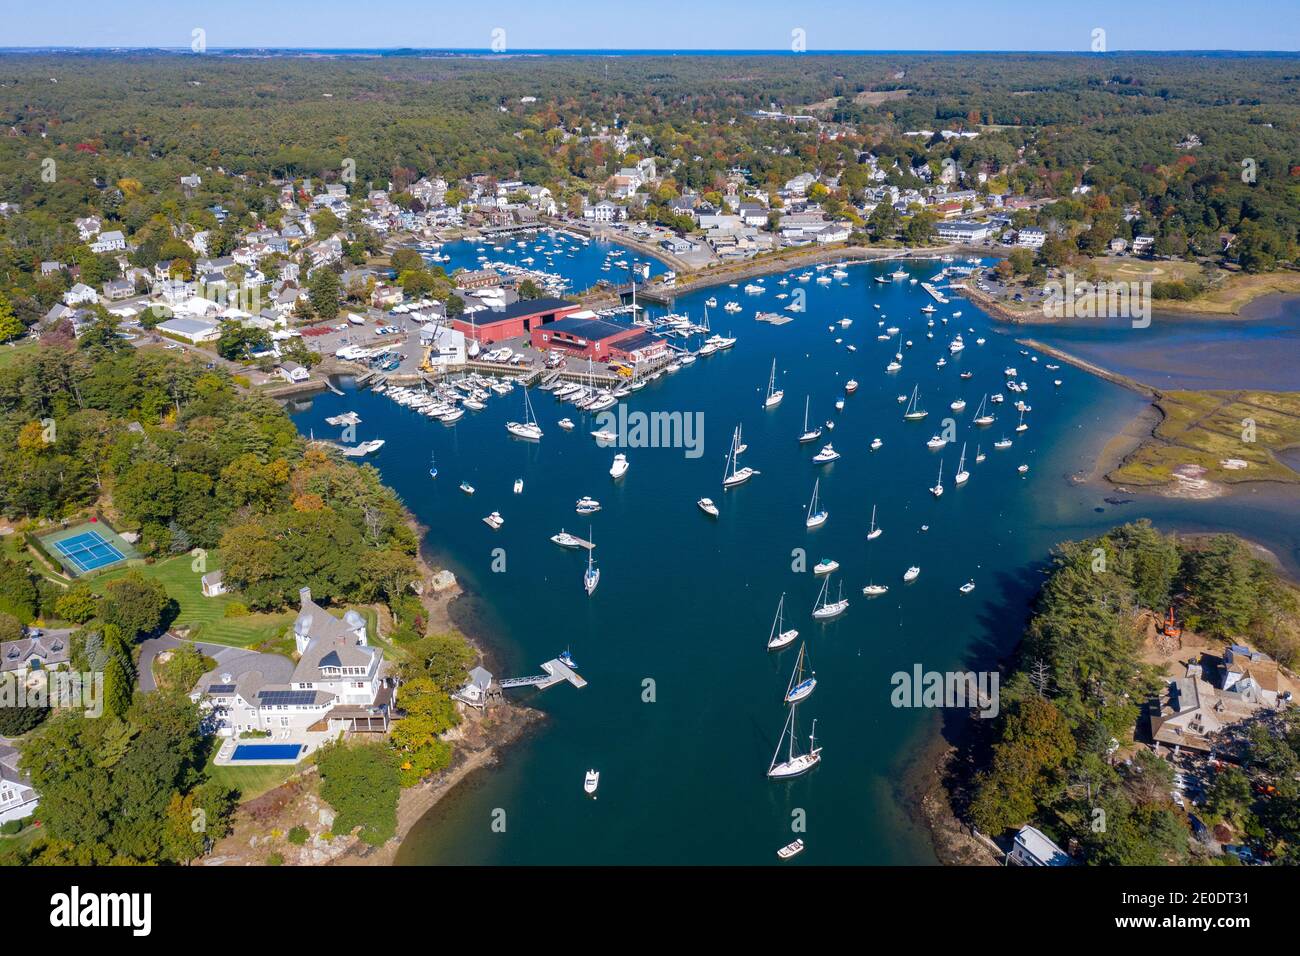 Aerial view of Manchester by the Sea, Massachusetts, USA Stock Photo